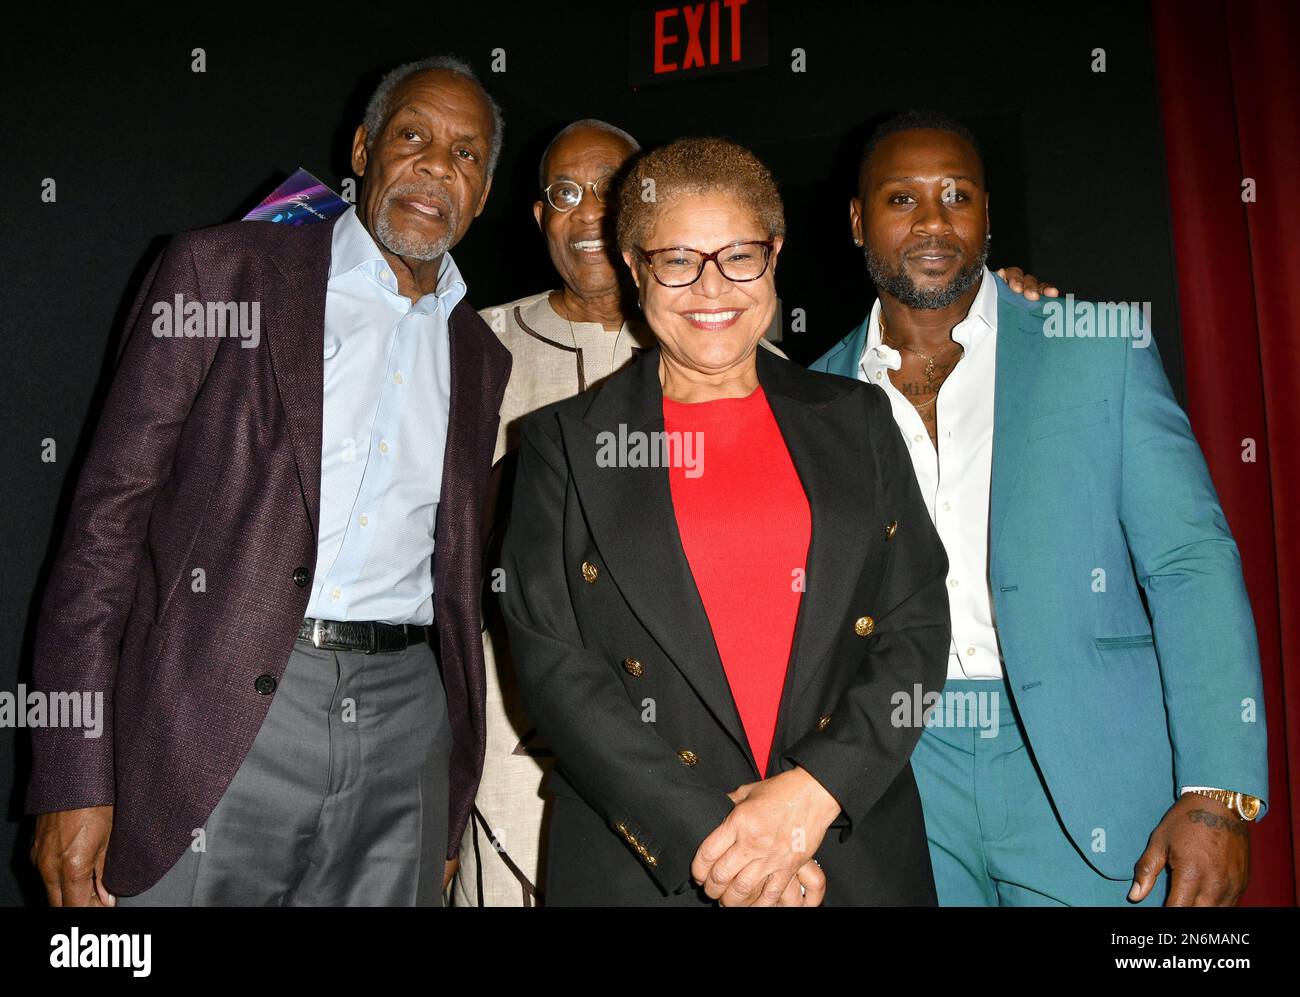 Los Angeles, Ca. 09th Feb, 2023. Danny Glover, Ayuko Babu, Karen Bass, Thomas Q Jones attend the 2023 Opening Night Gala for the Pan African Film & Arts Festival on February 09, 2023 at the Directors Guild of America in Los Angeles, California. Credit: Koi Sojer/Snap'n U Photos/Media Punch/Alamy Live News Stock Photo